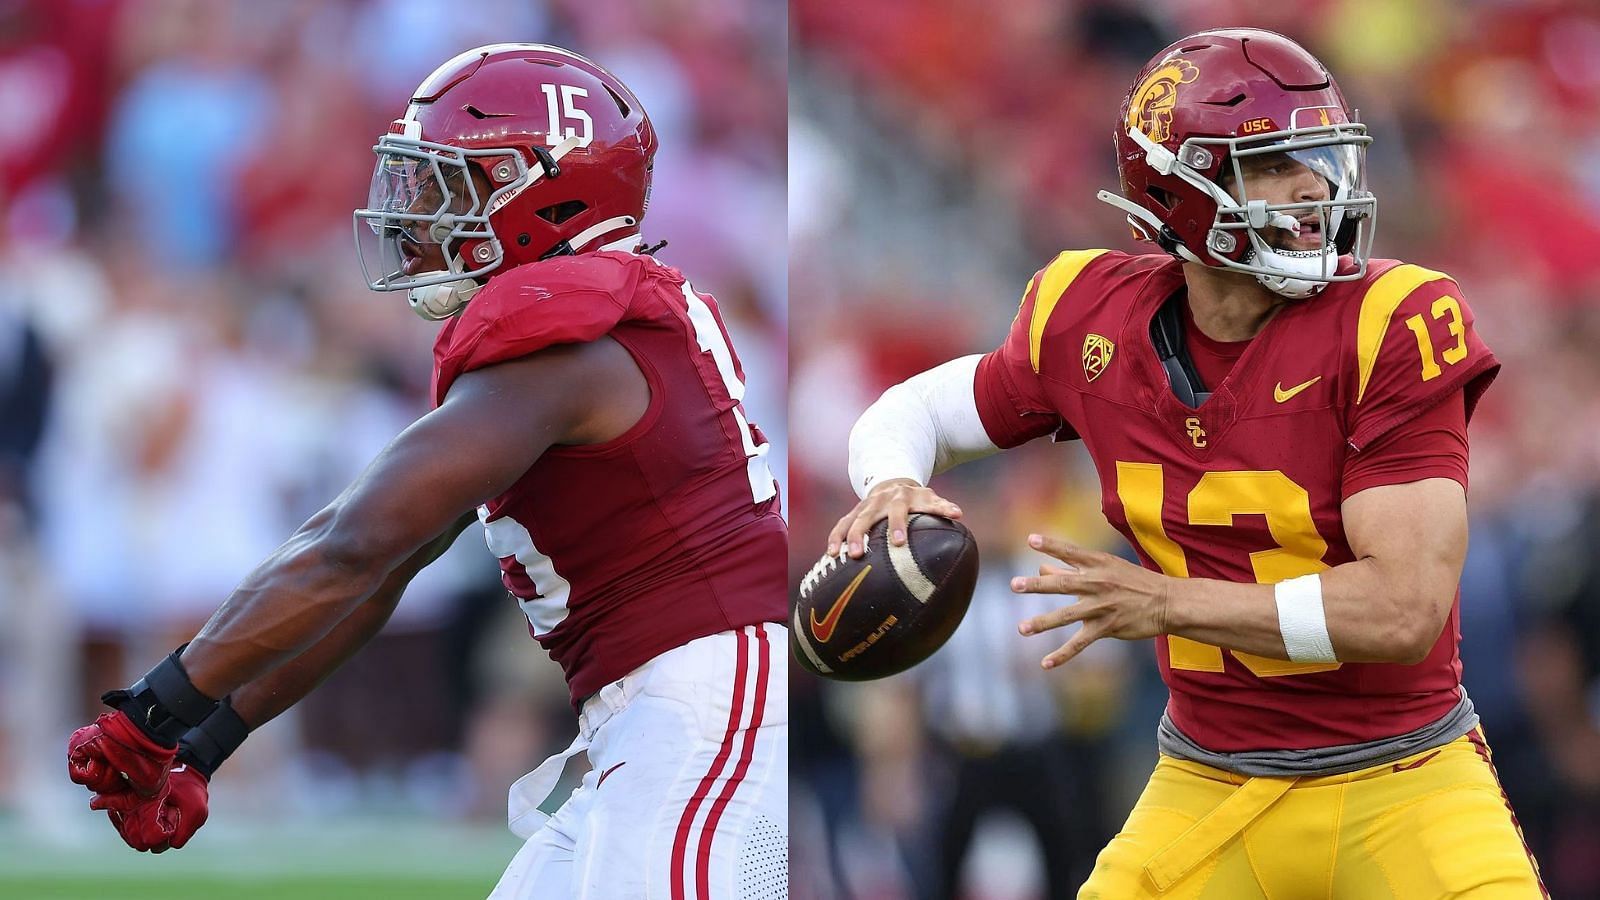 In a recent ranking of college football programs, Alabama and Southern California were two blue blood picks.